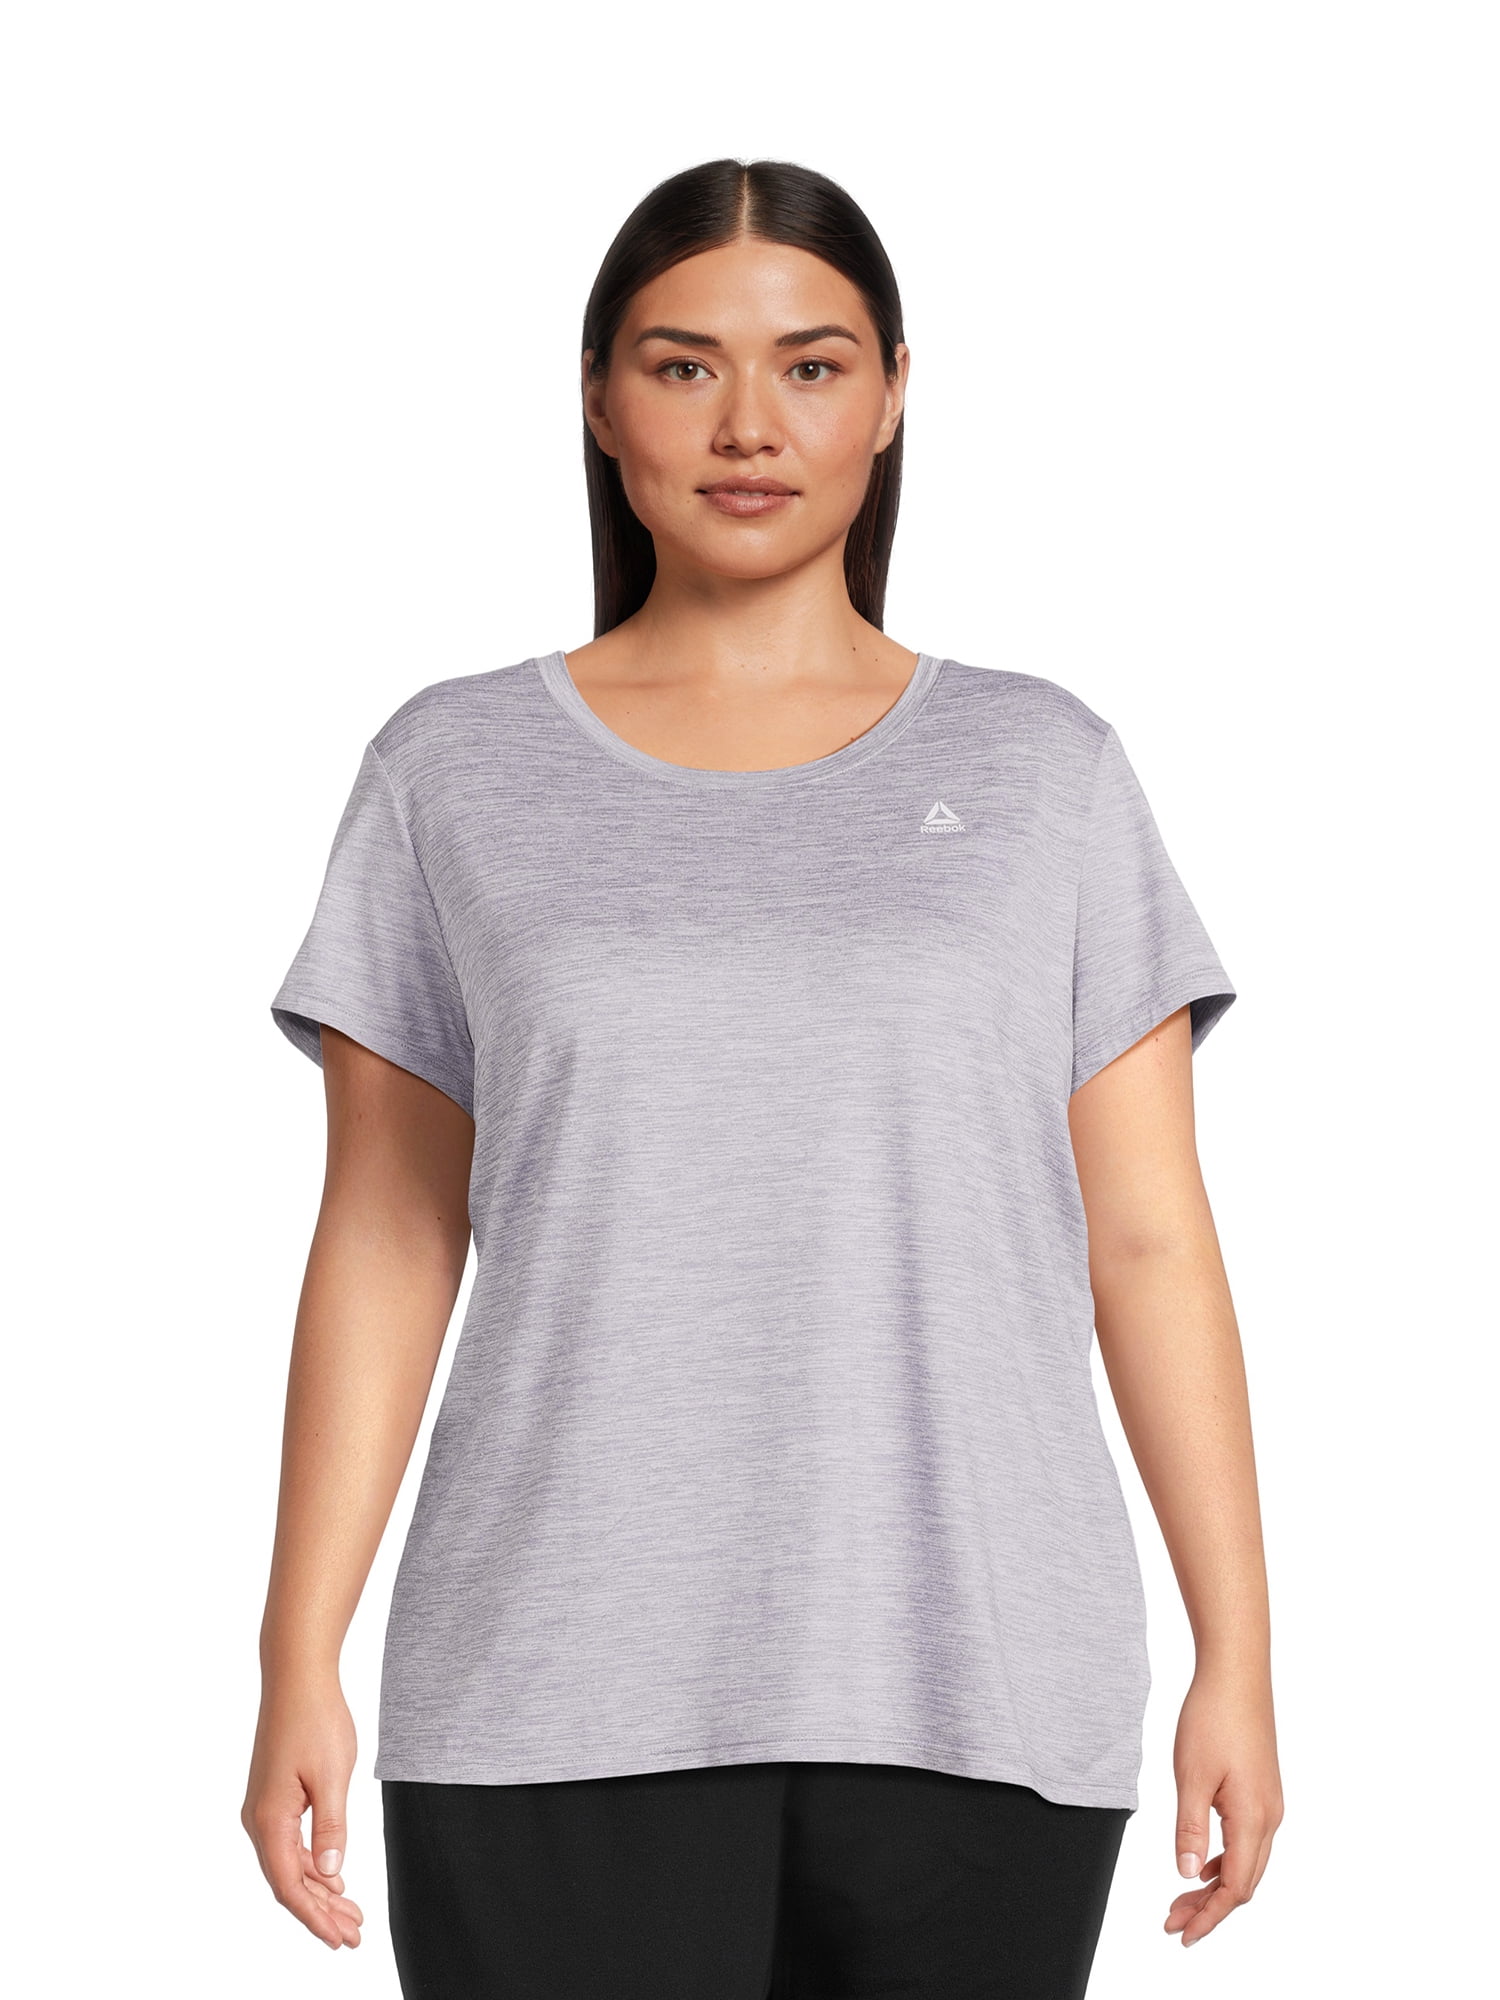 Reebok Women's Plus Size Legacy Performance Top with Short Sleeves ...